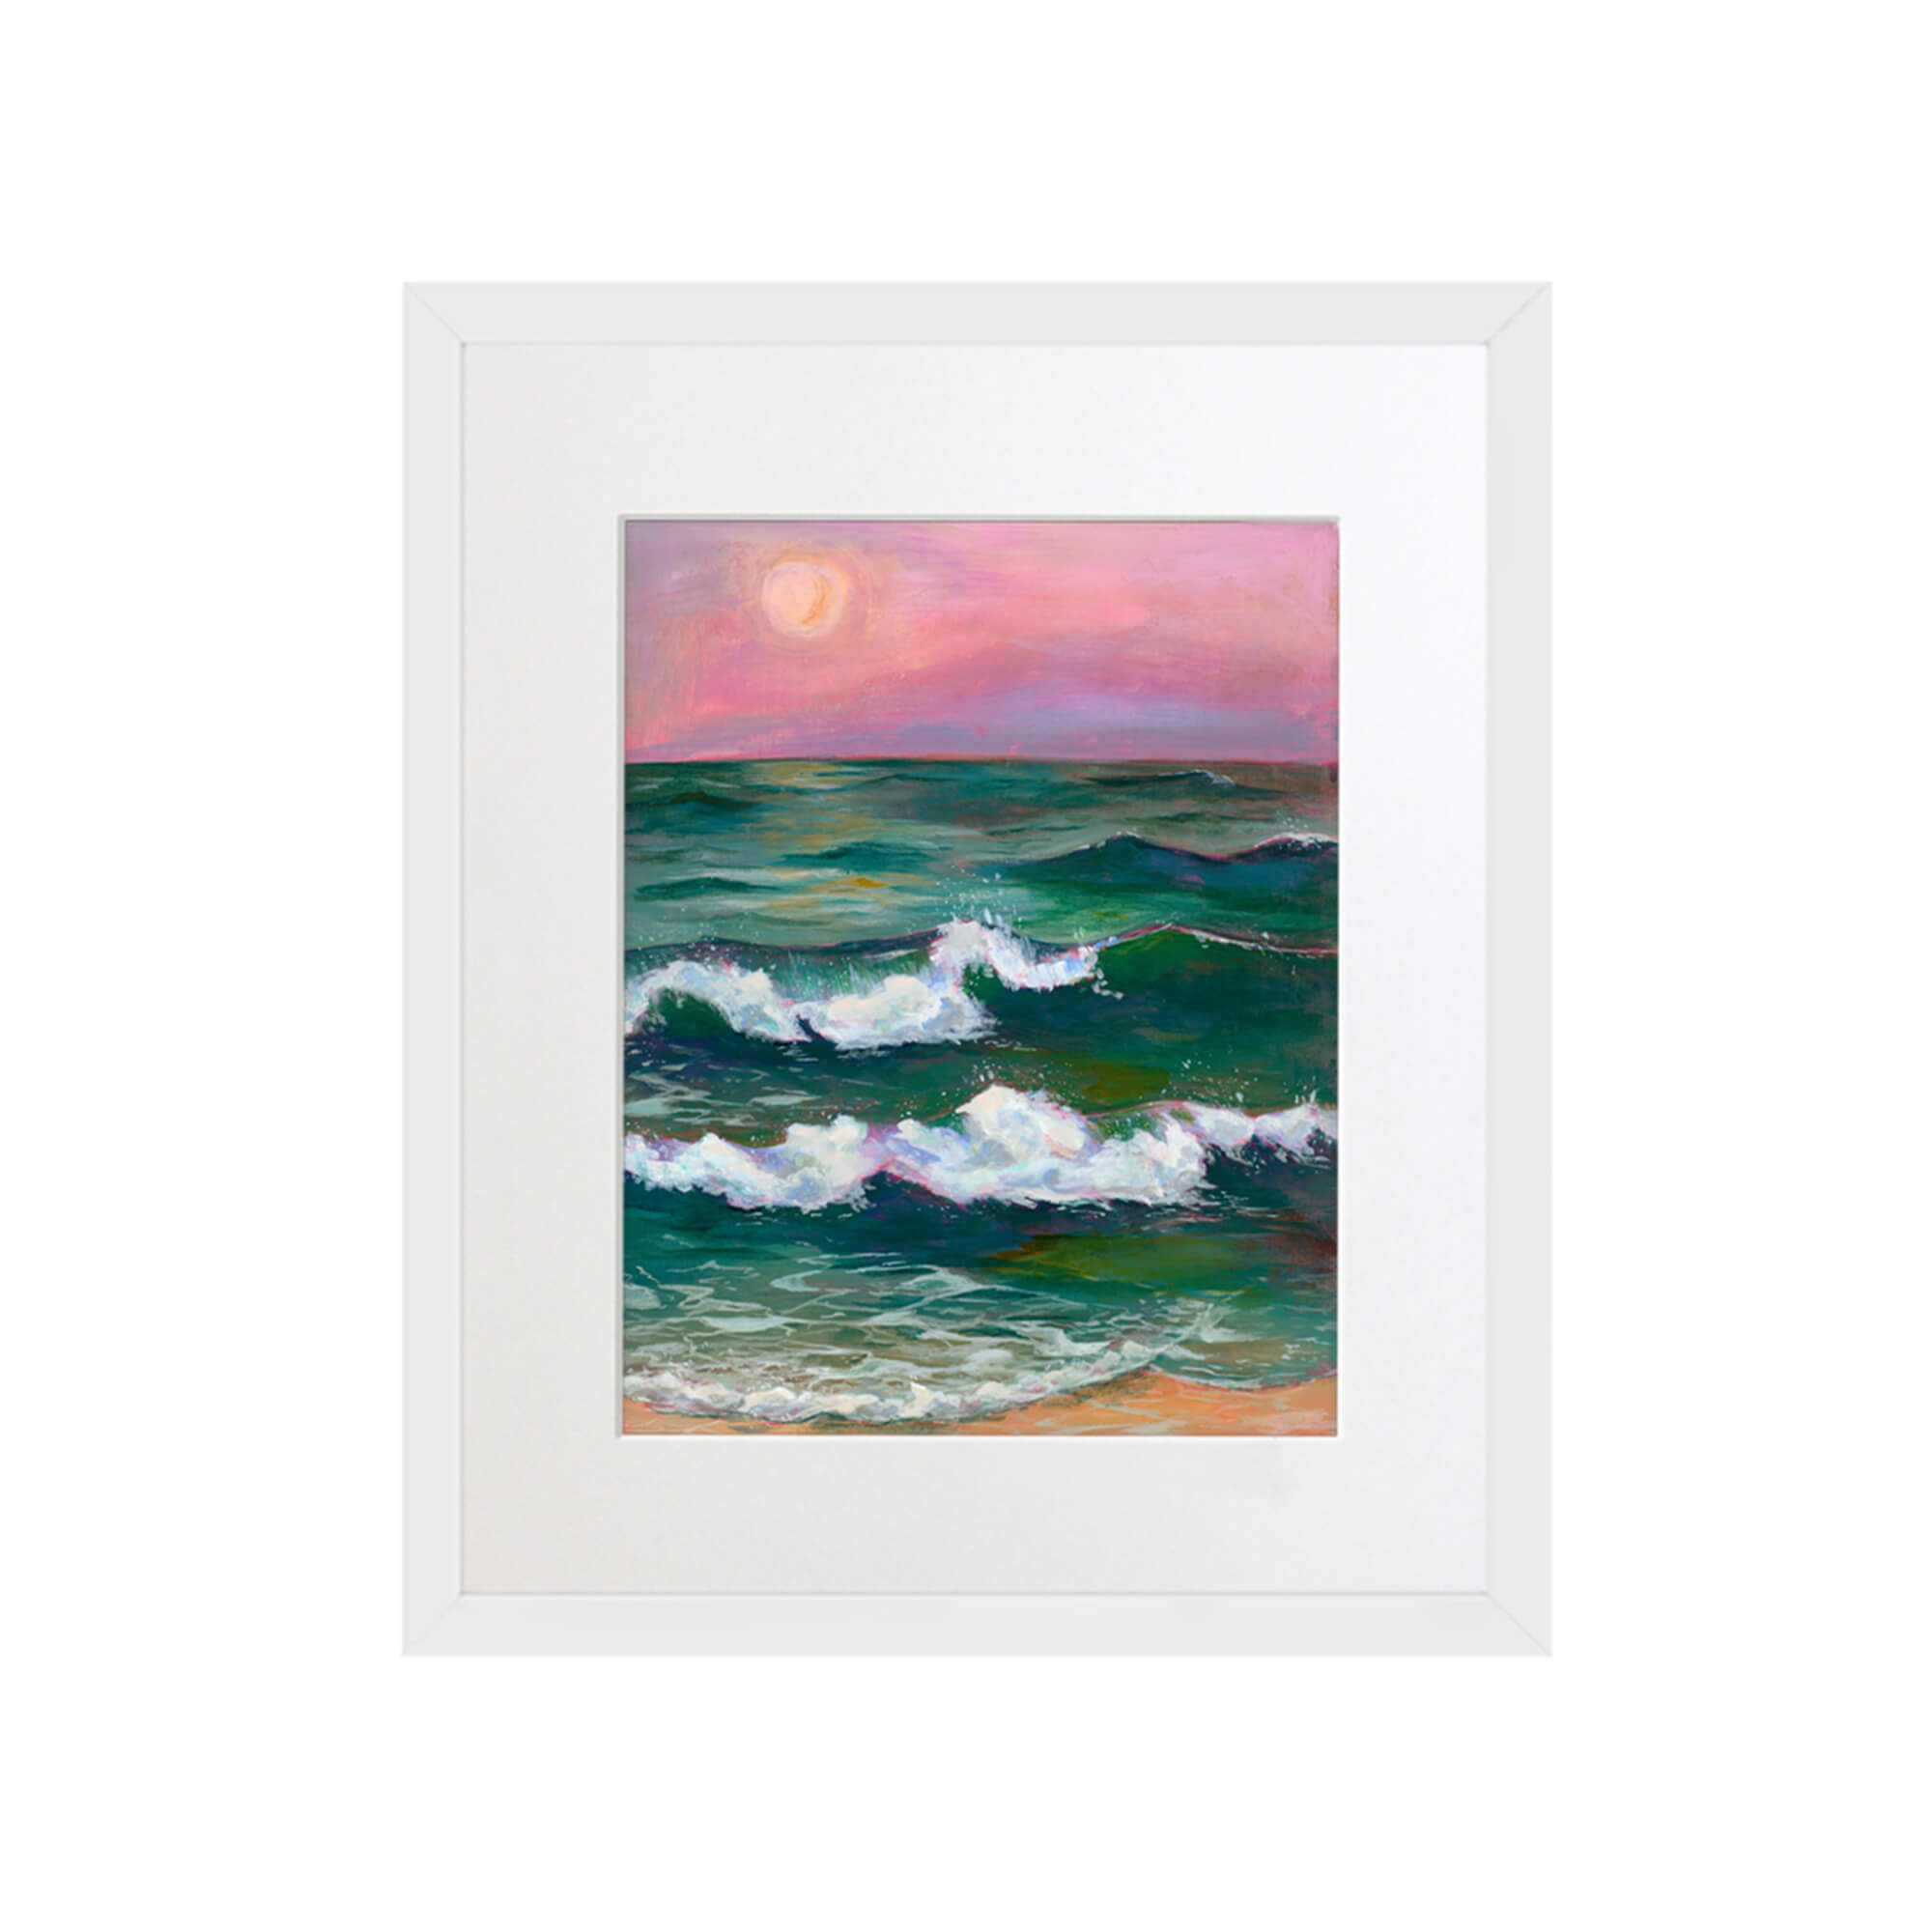 A sunset with green colored crashing waves by Hawaii artist Lindsay Wilkins